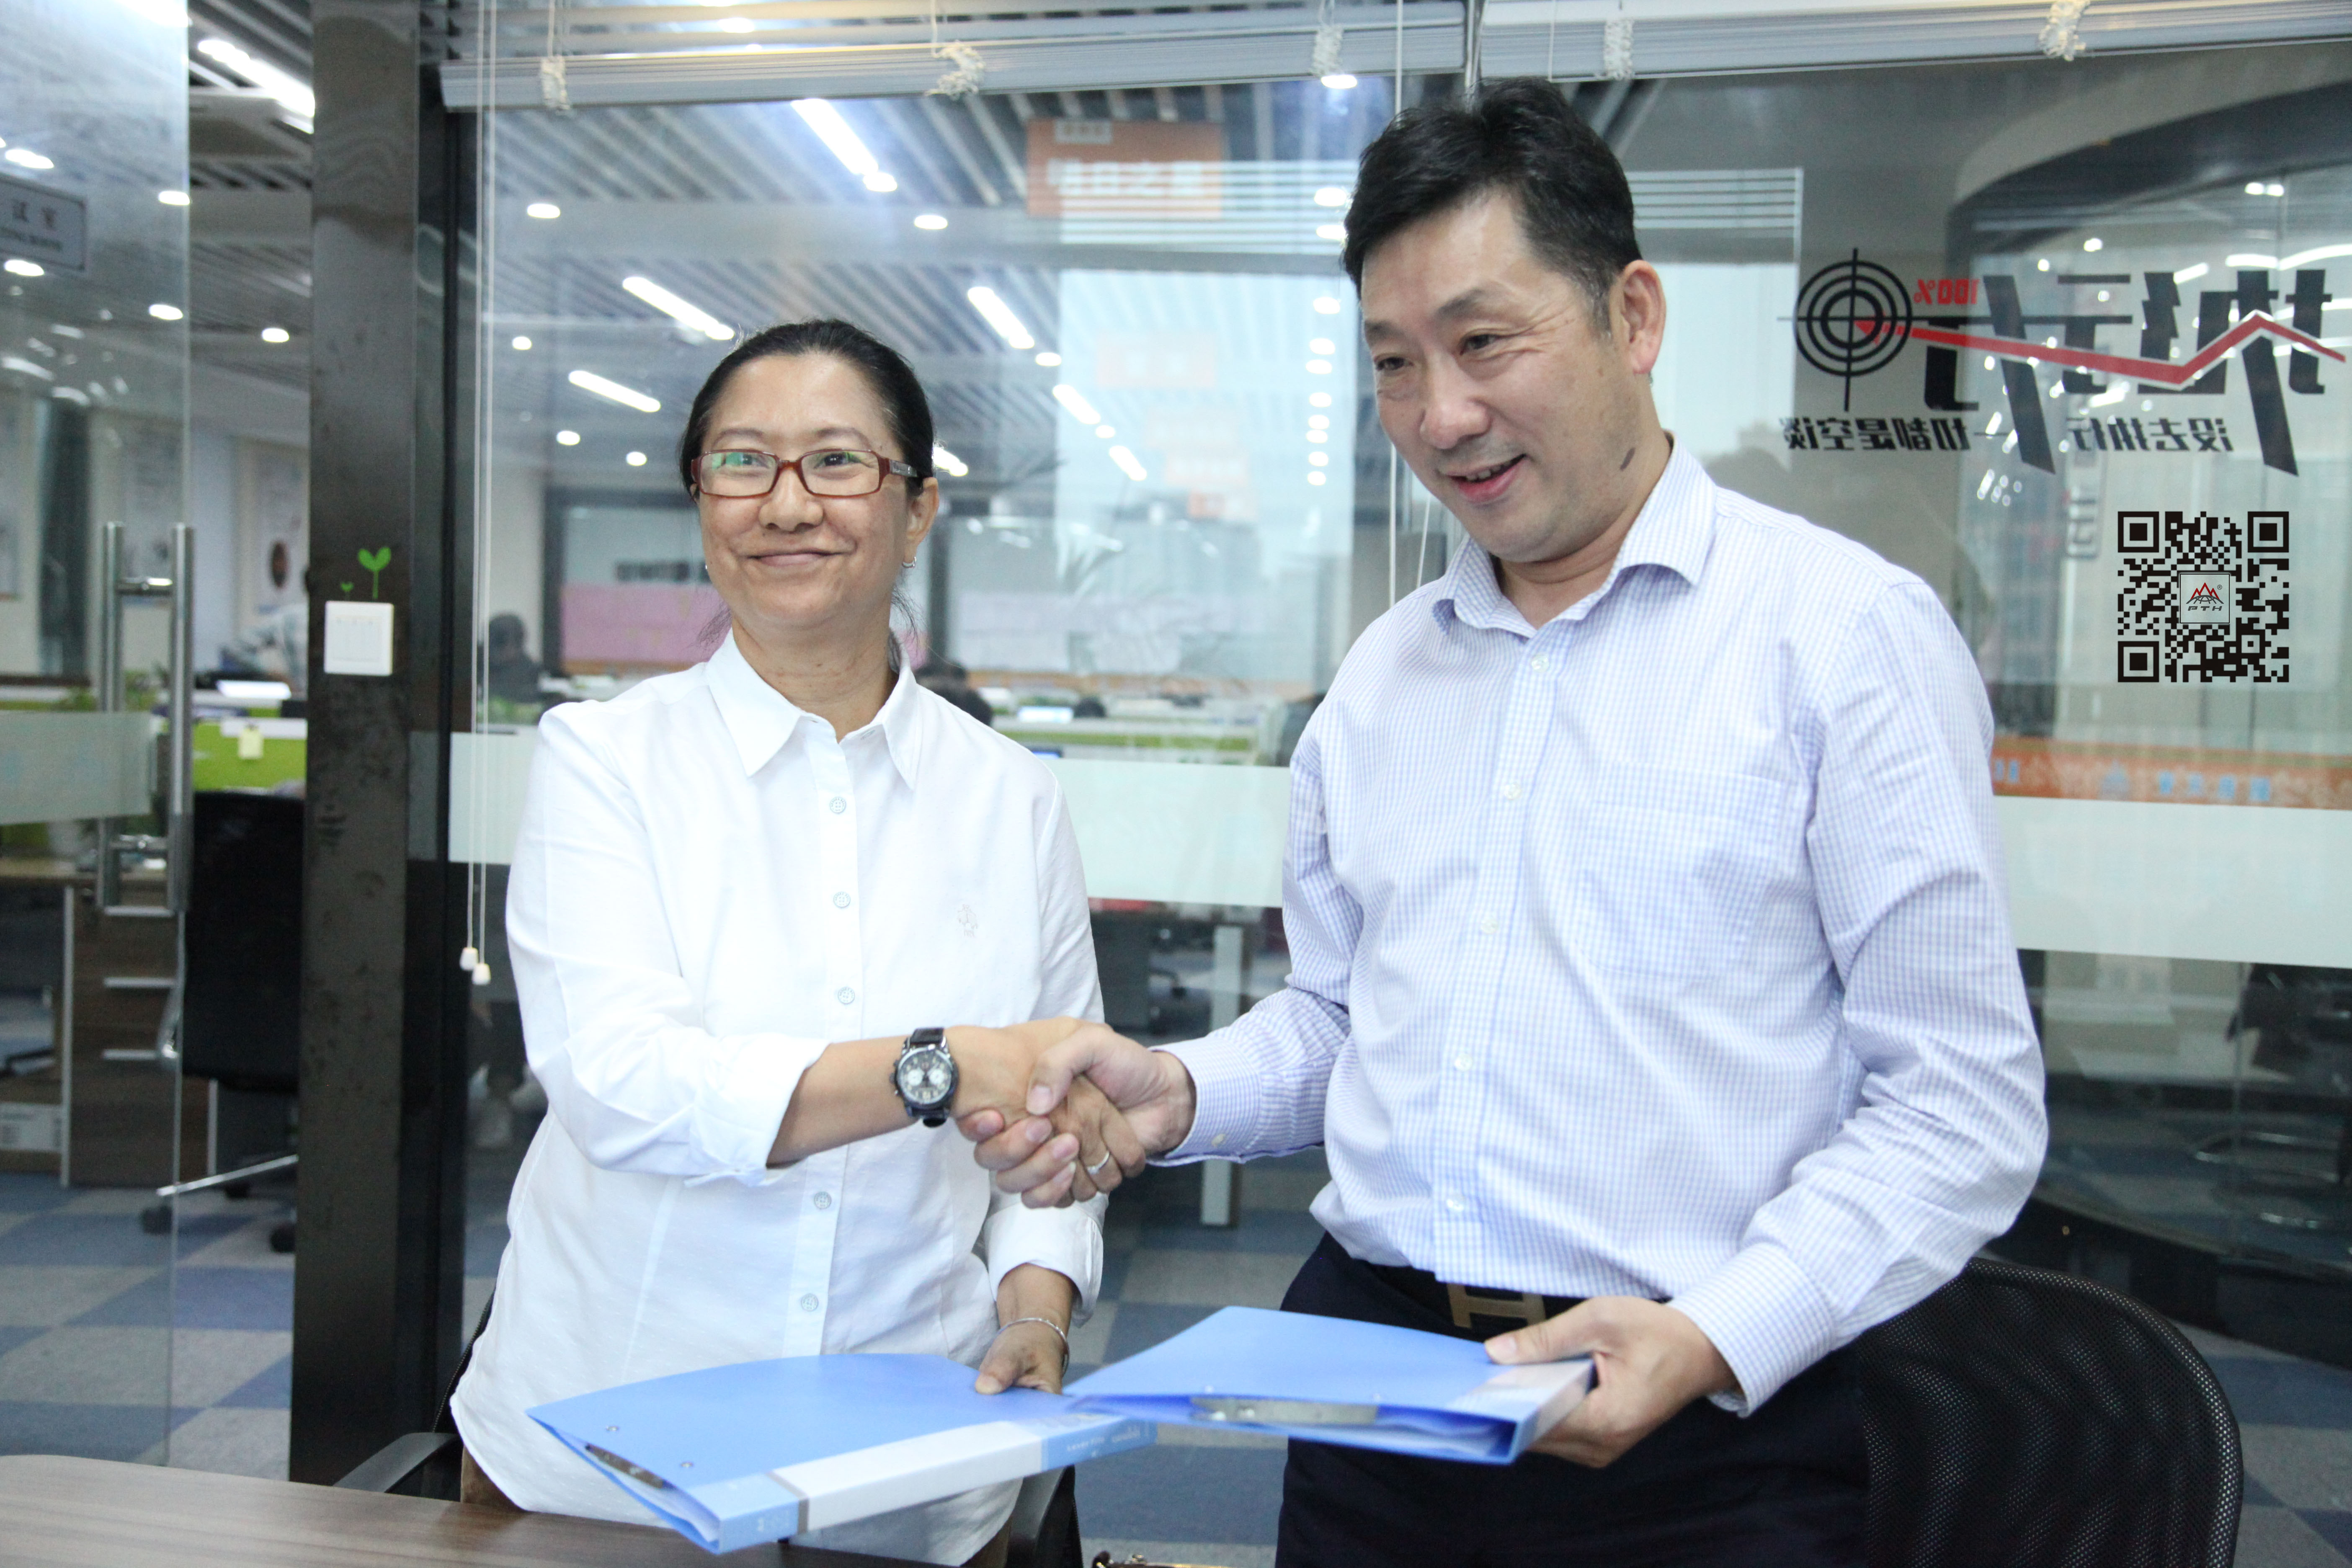 PTH And Construction Trading Company From Malaysian Signed a Cooperation Agreement